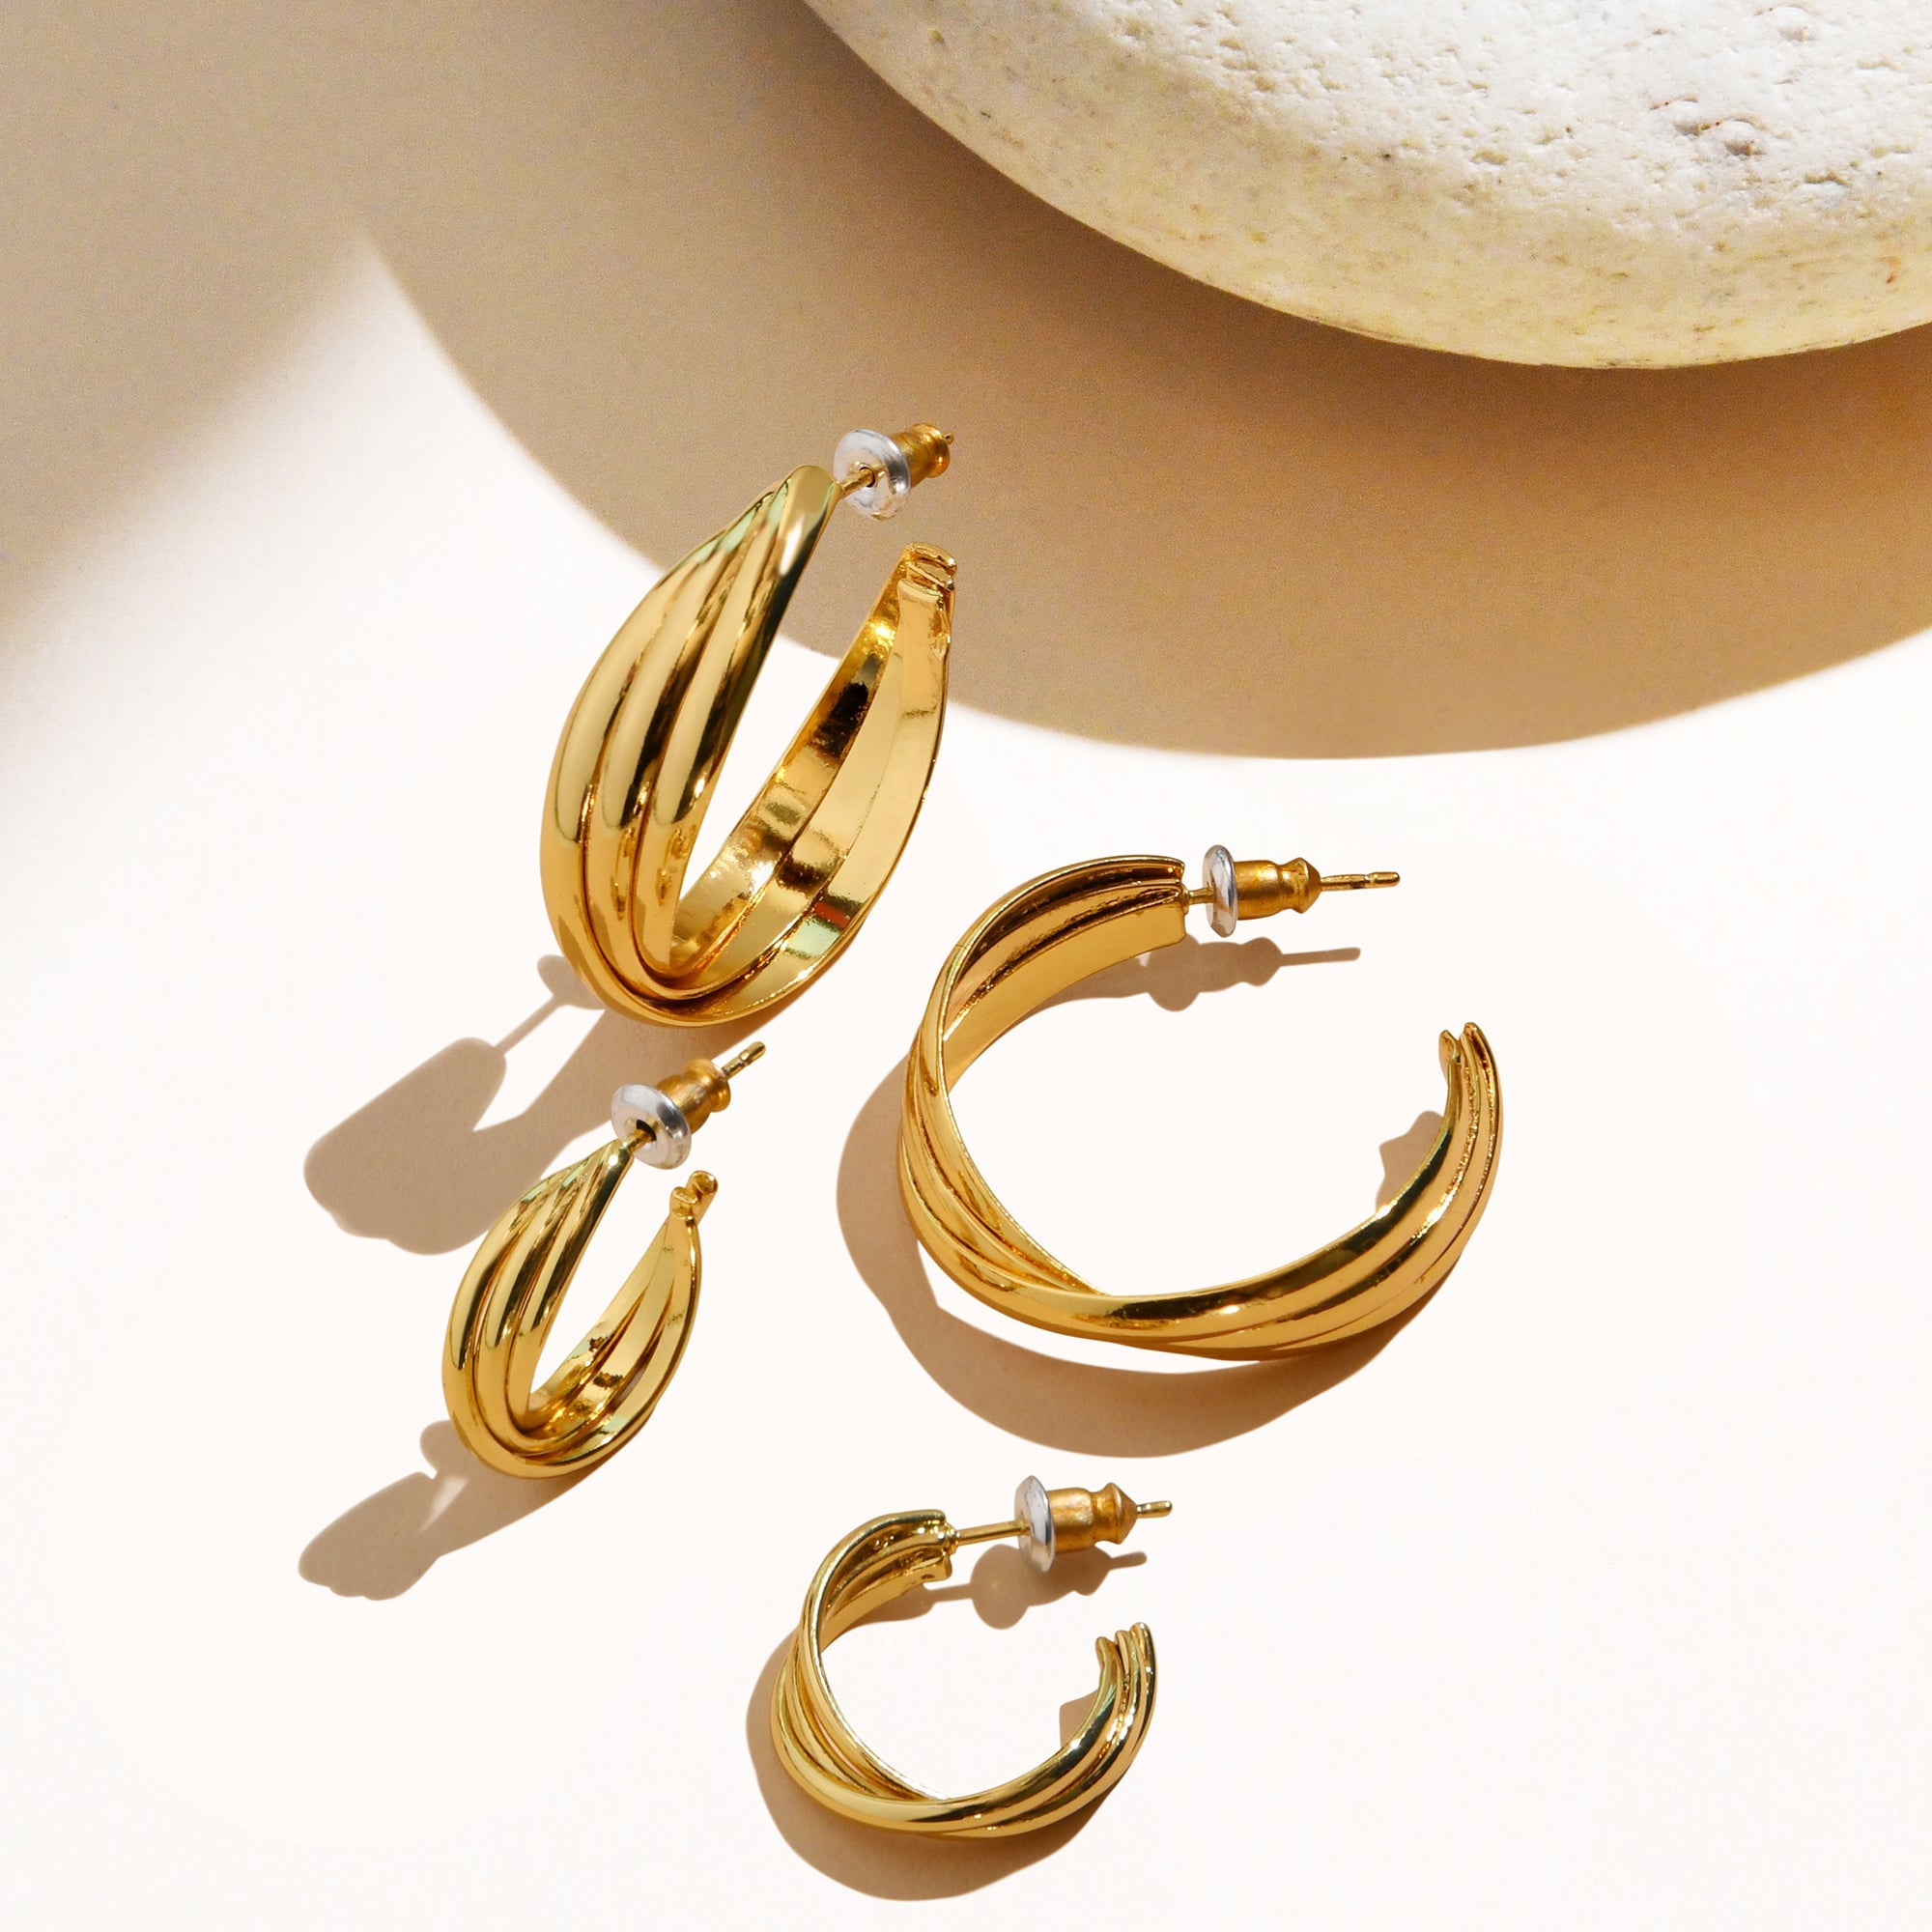 Real Gold Plated Z Set of 2 Large Twisted Graduated Hoop Earrings For Women By Accessorize London